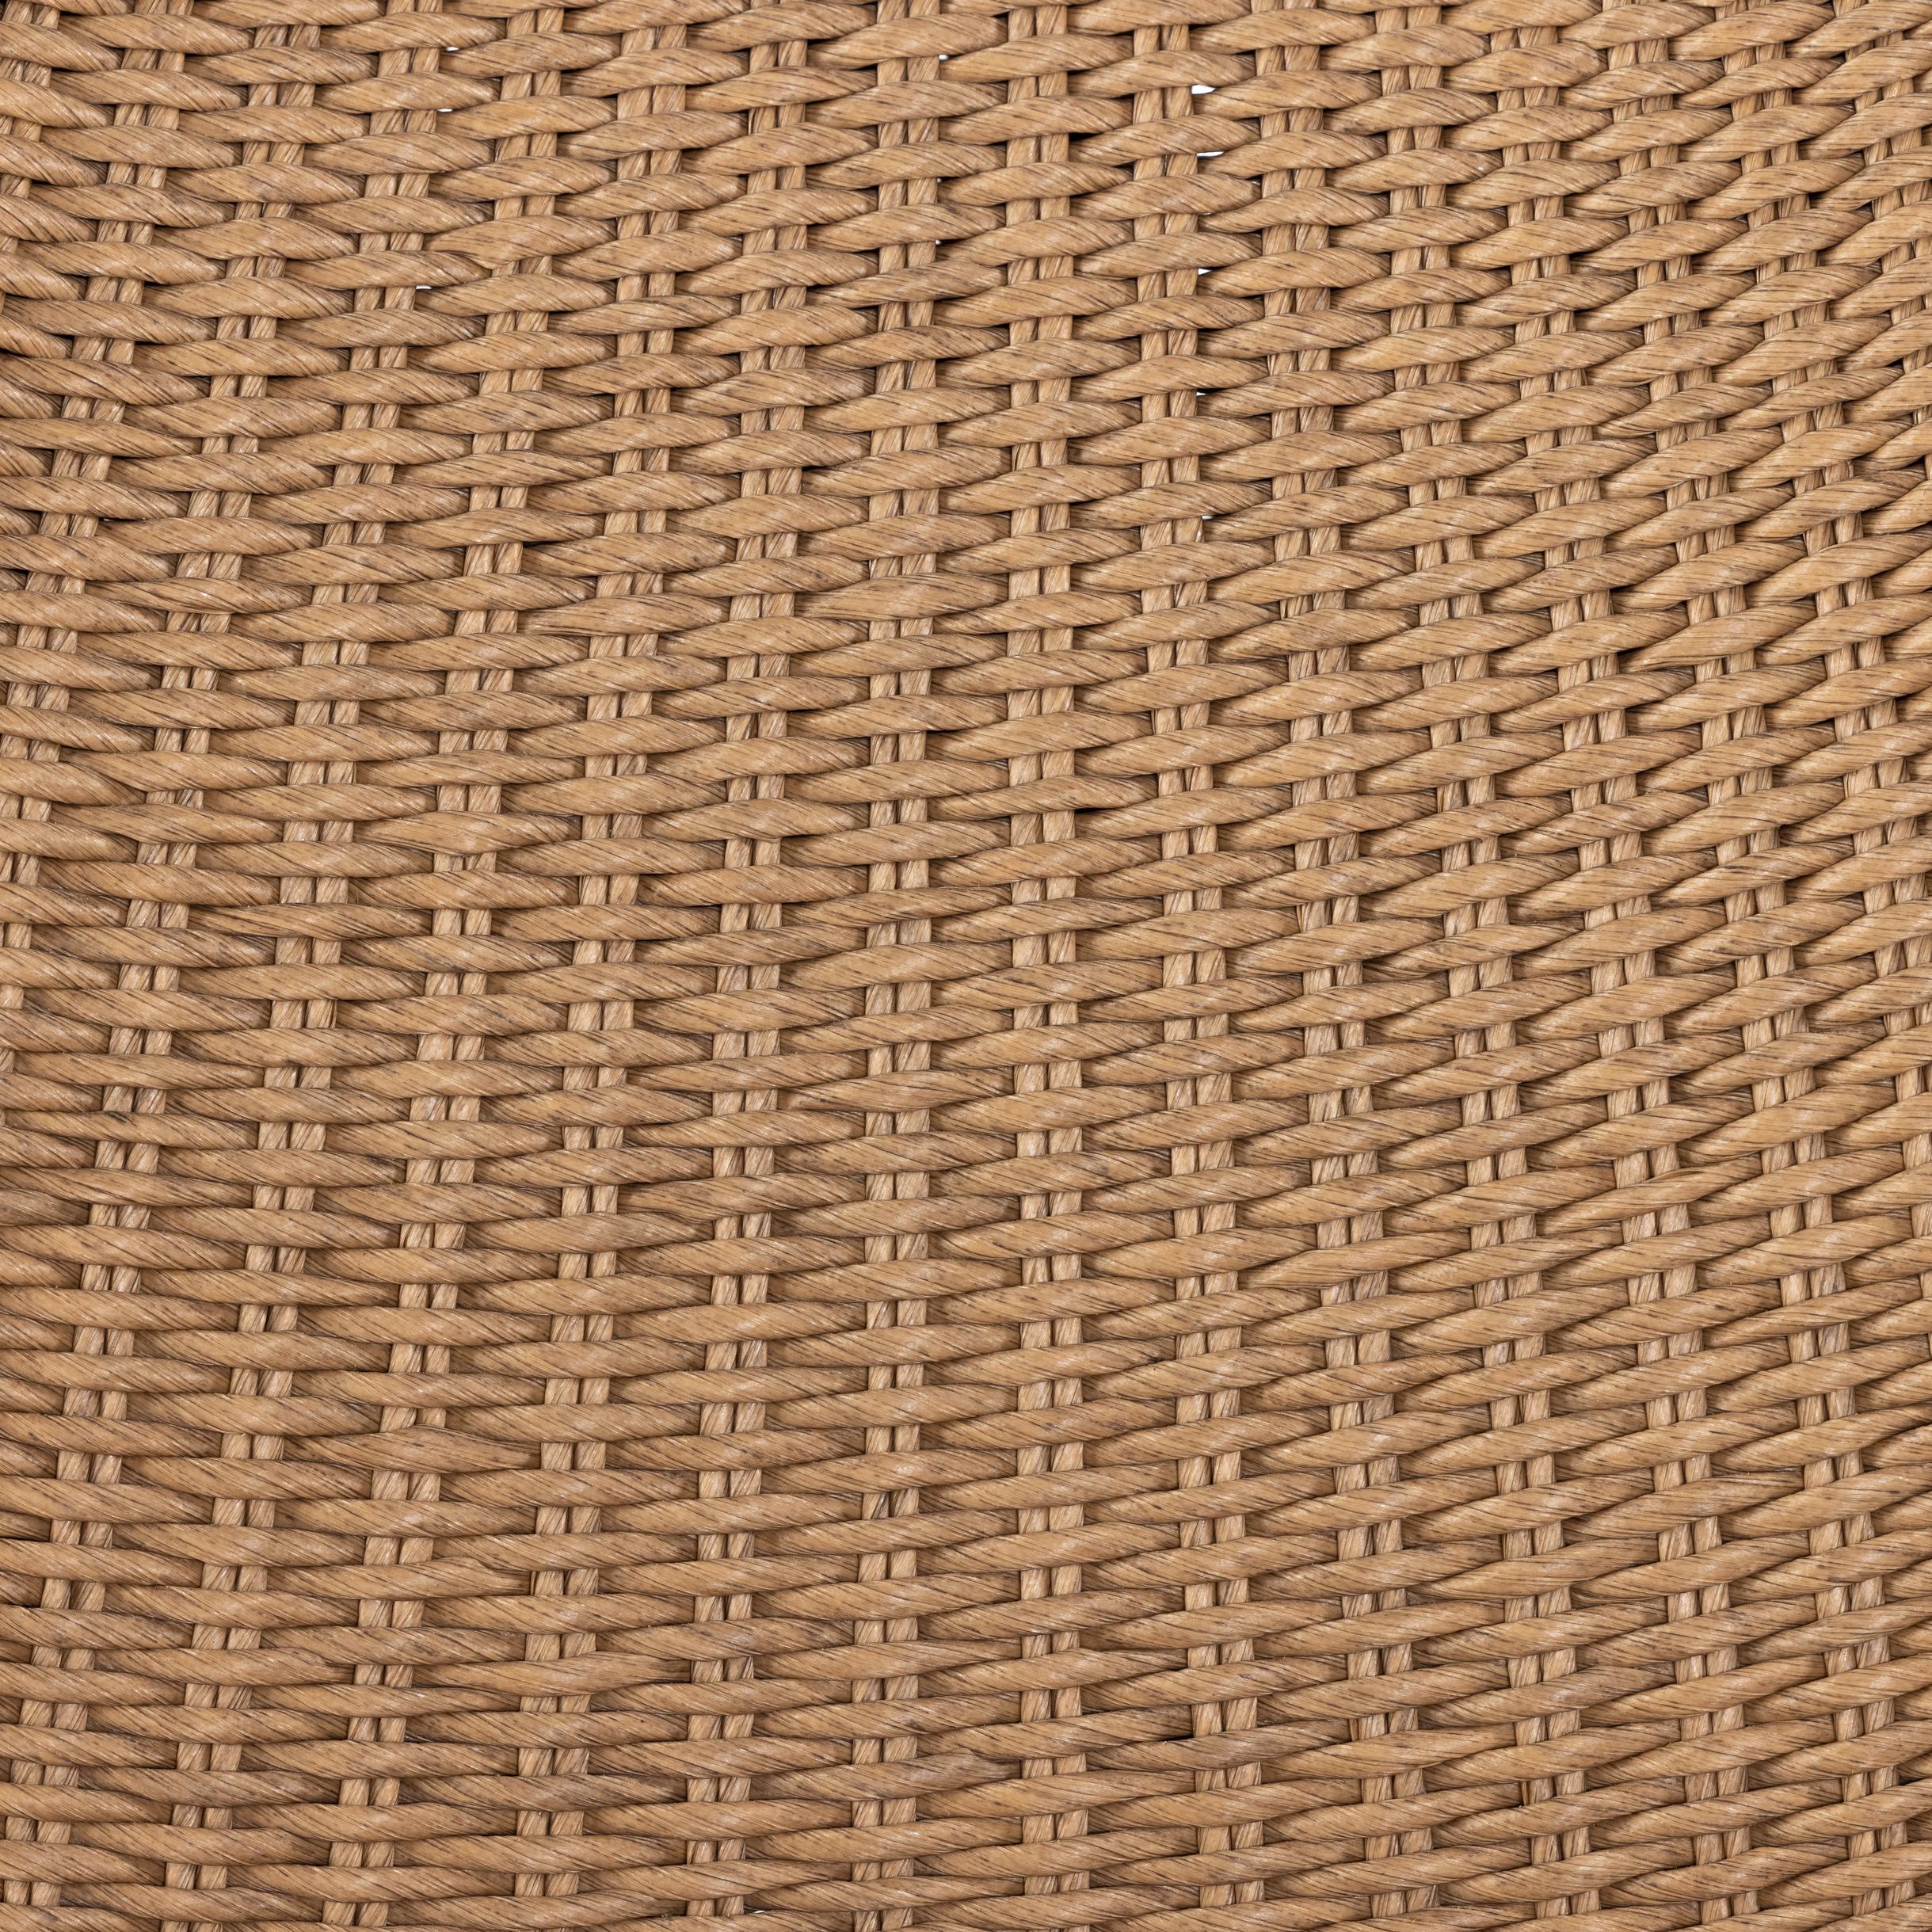 Portia Outdoor Dining Chair - StyleMeGHD - Wicker Outdoor Dining Chair